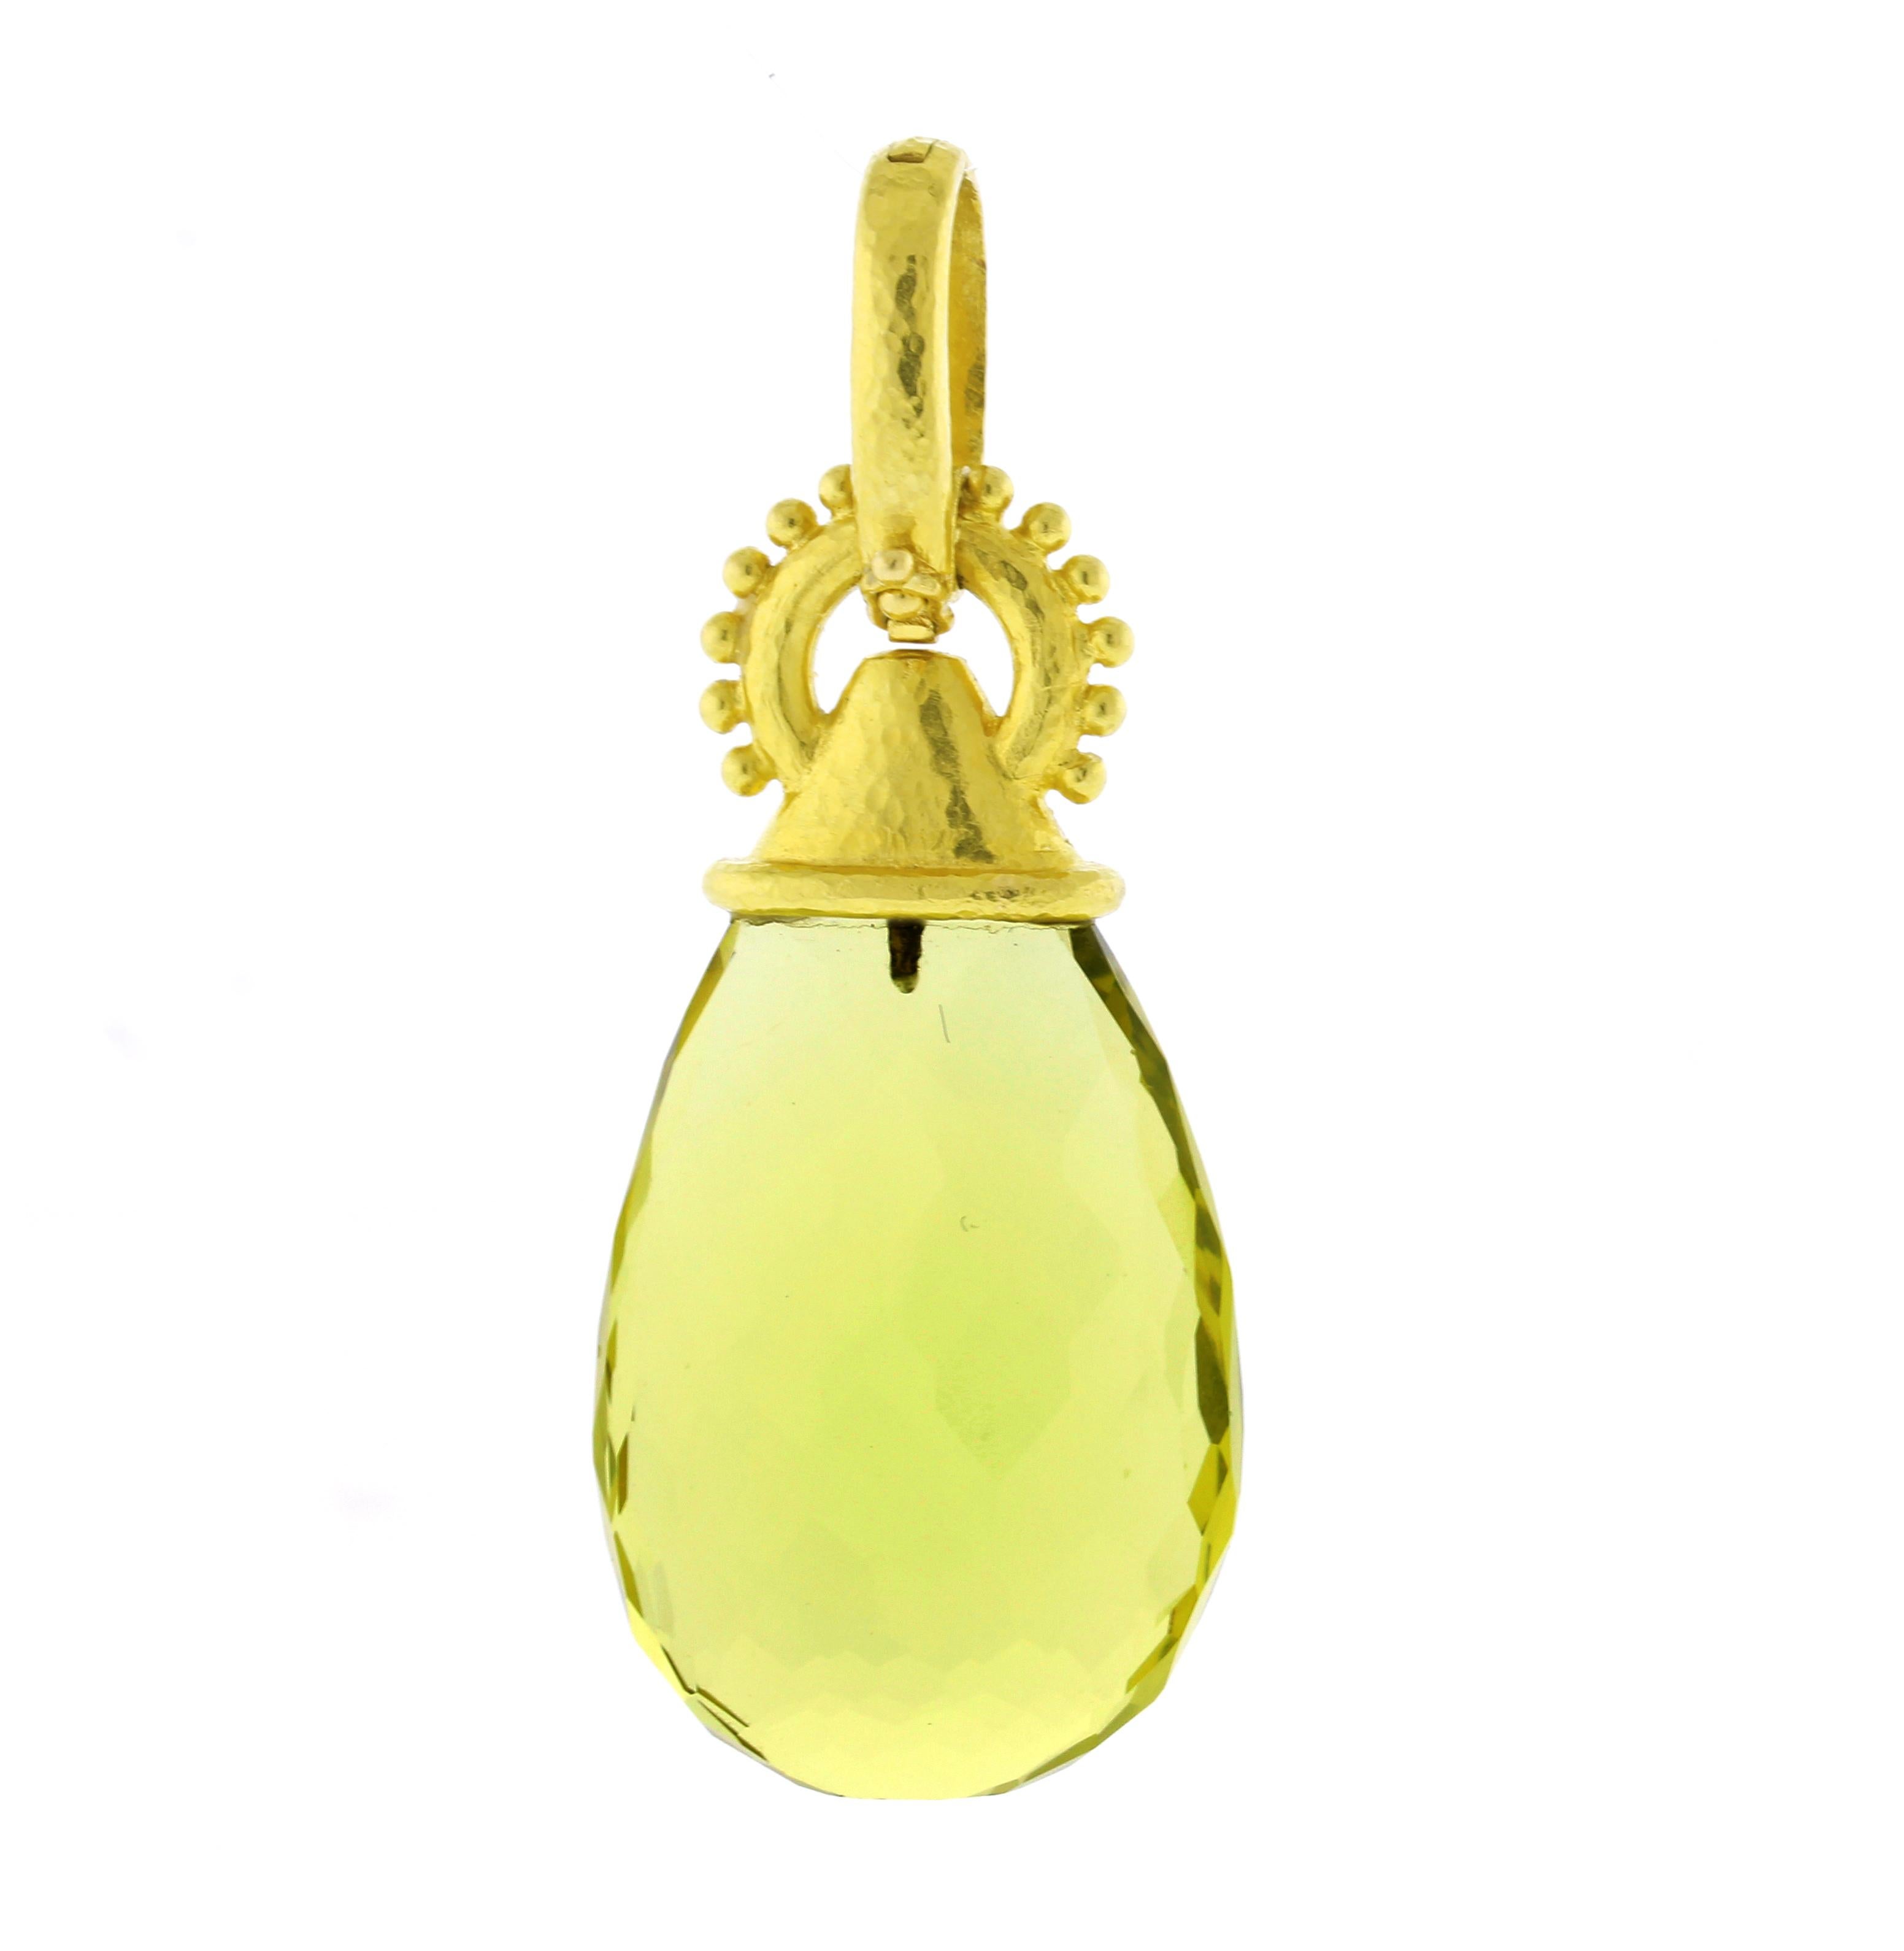 From Elizabeth Locke, a large faceted Prasiolite (Green Quartz) pendant drop set in her signature 19 karat textured gold,. The pendant features a snap bail and measures 2½ inches from top to bottom.